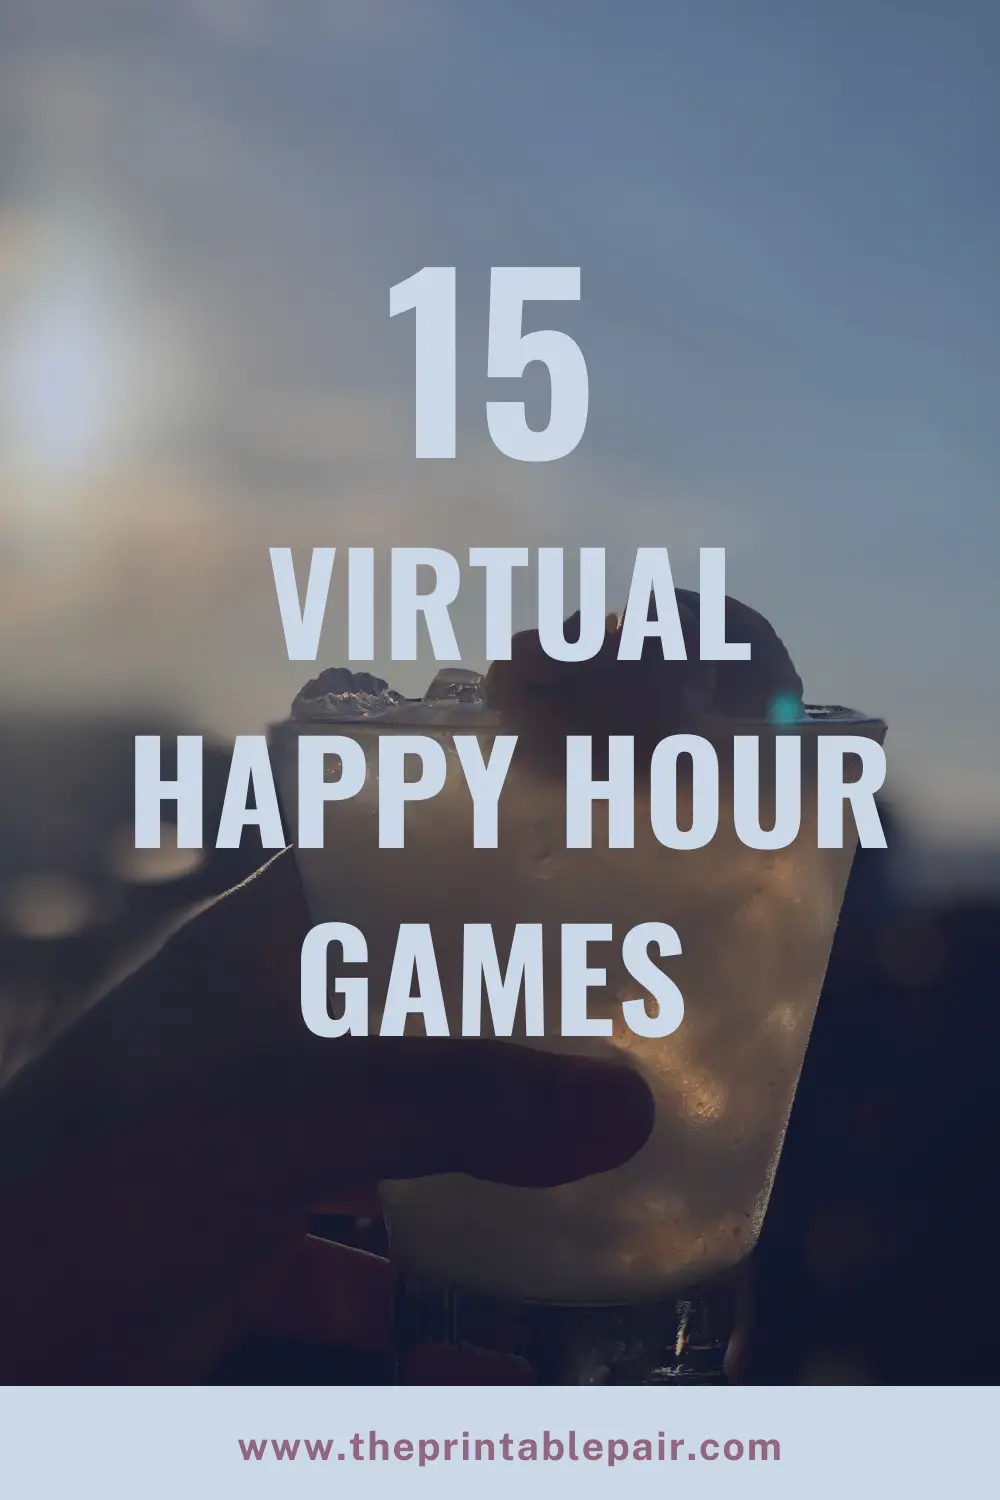 15 Virtual Happy Hour Games Graphic